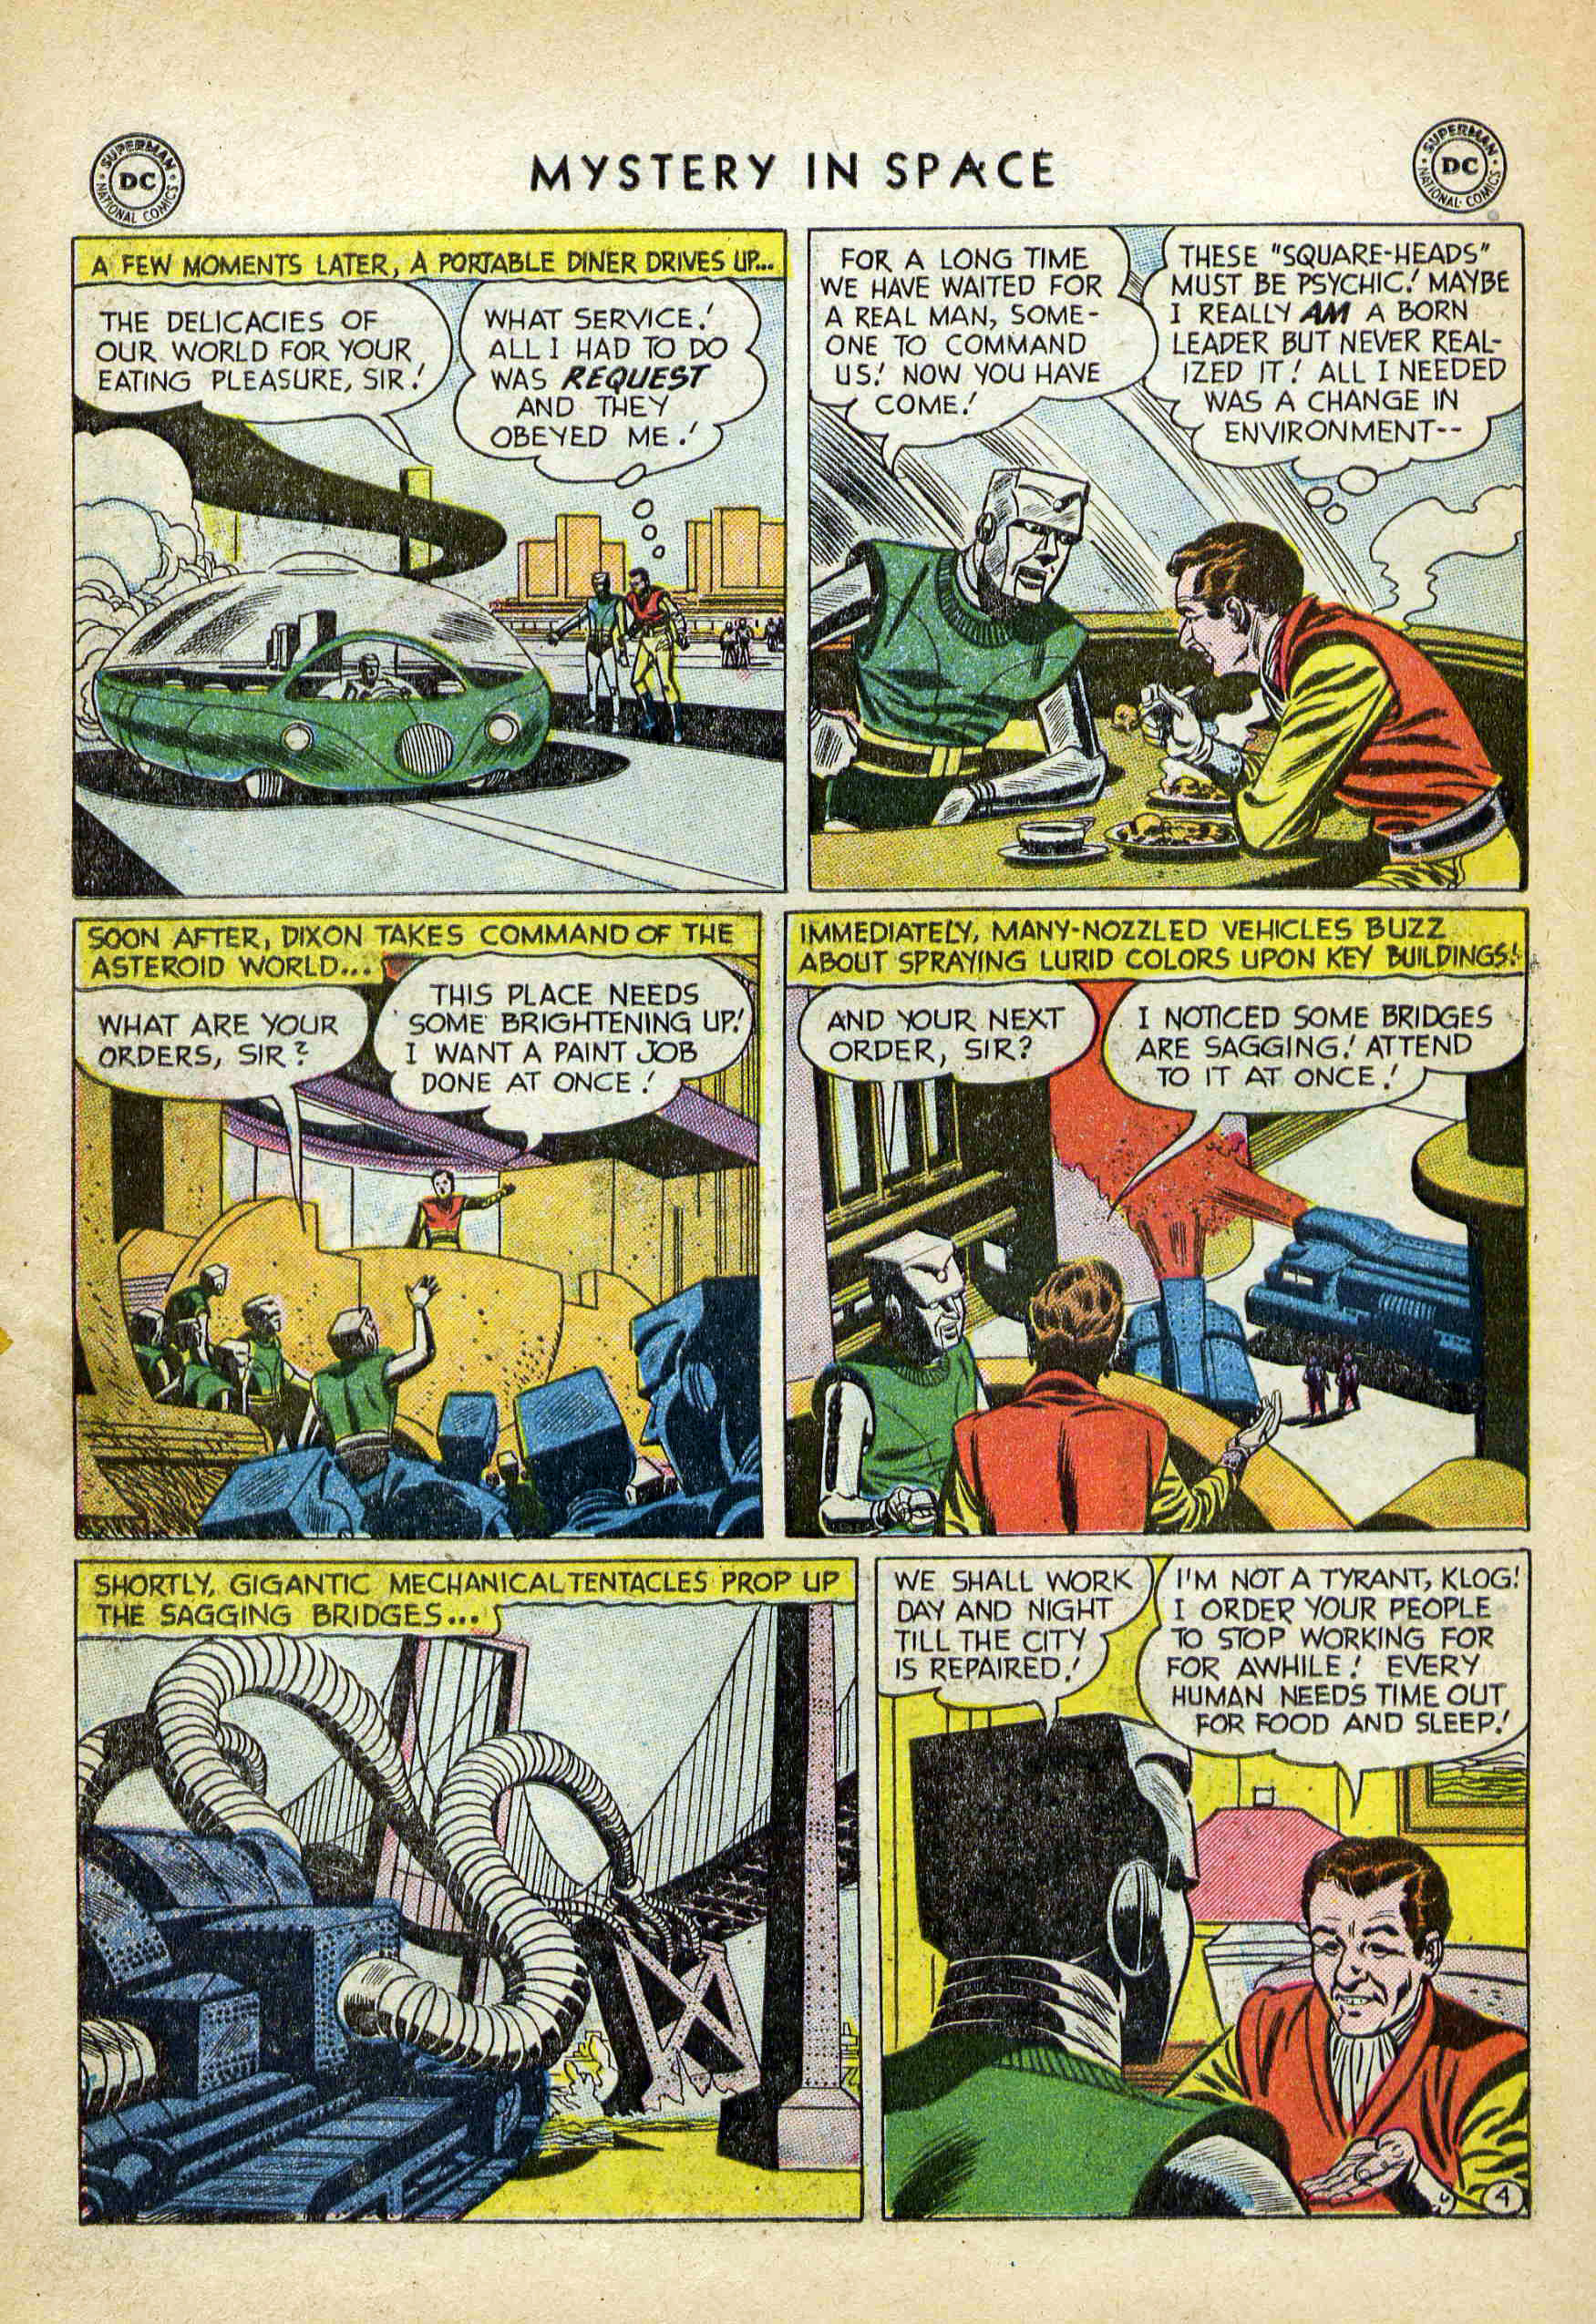 Mystery in Space (1951) 26 Page 21